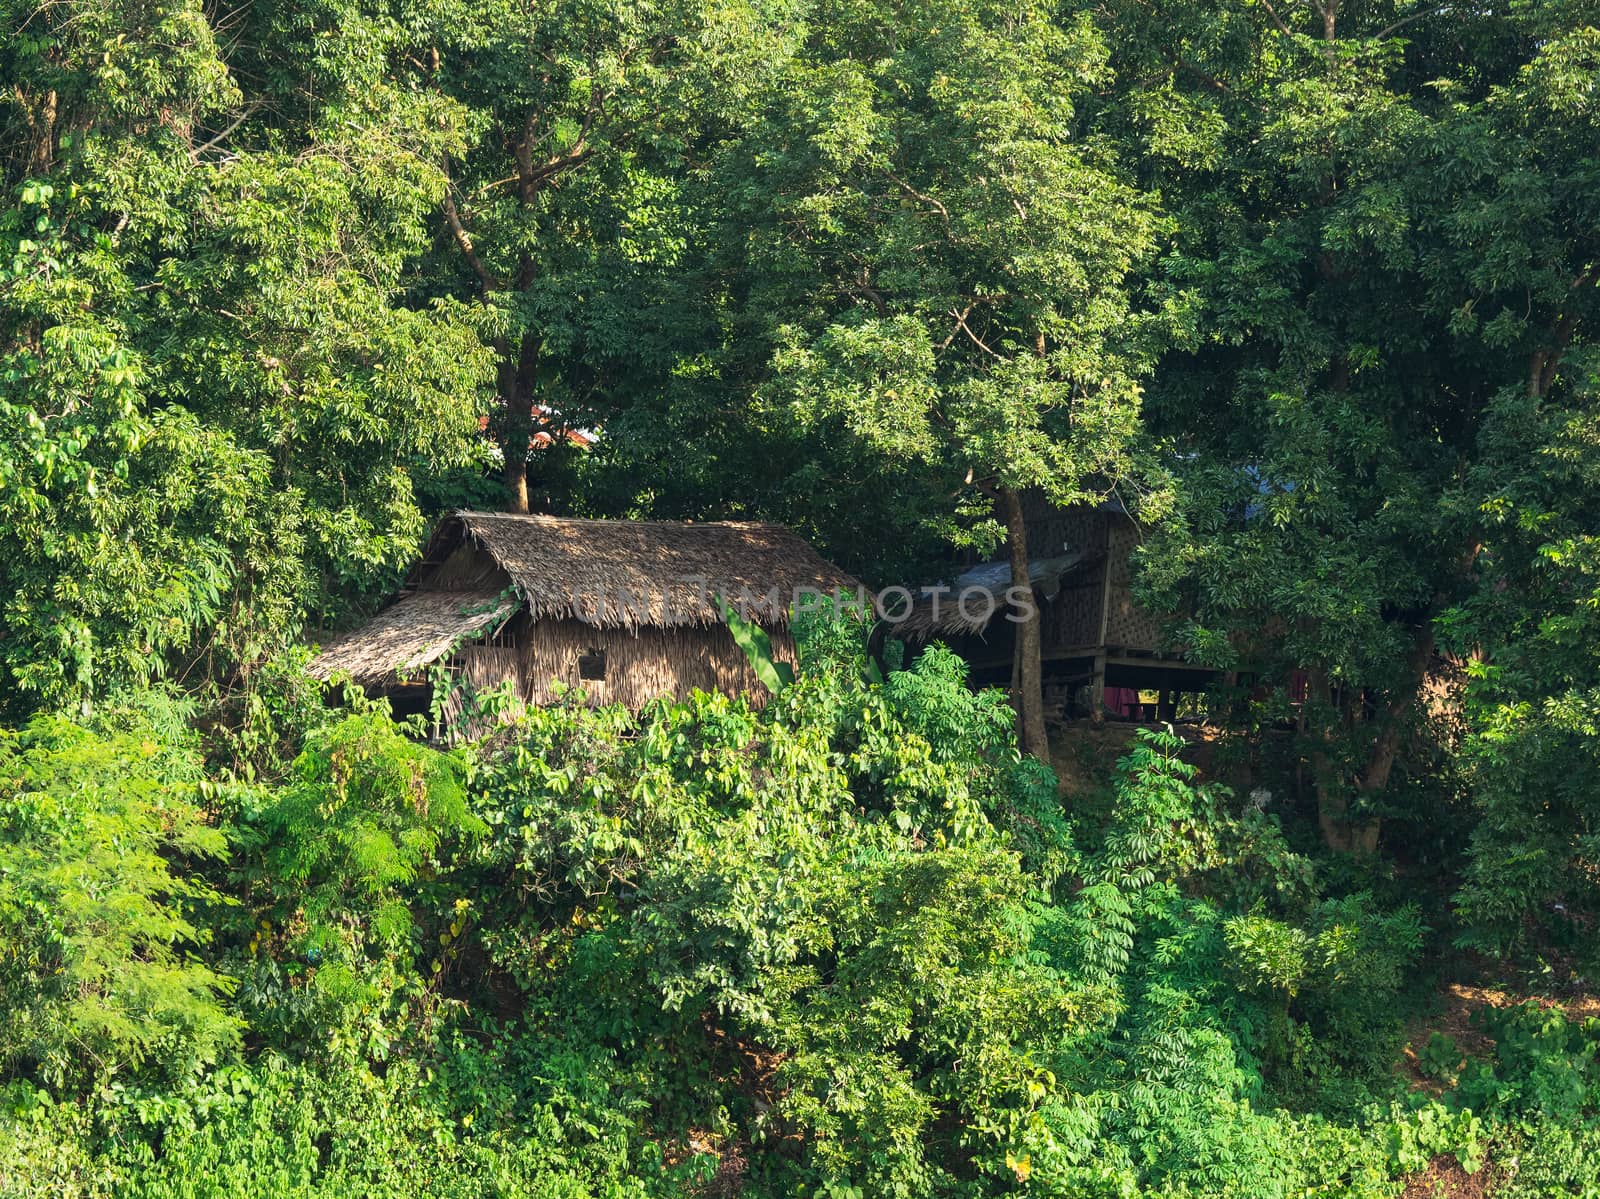 Traditional straw house at a tropical forest in Mrauk U, an ancient town in the Rakhine State of Myanmar.